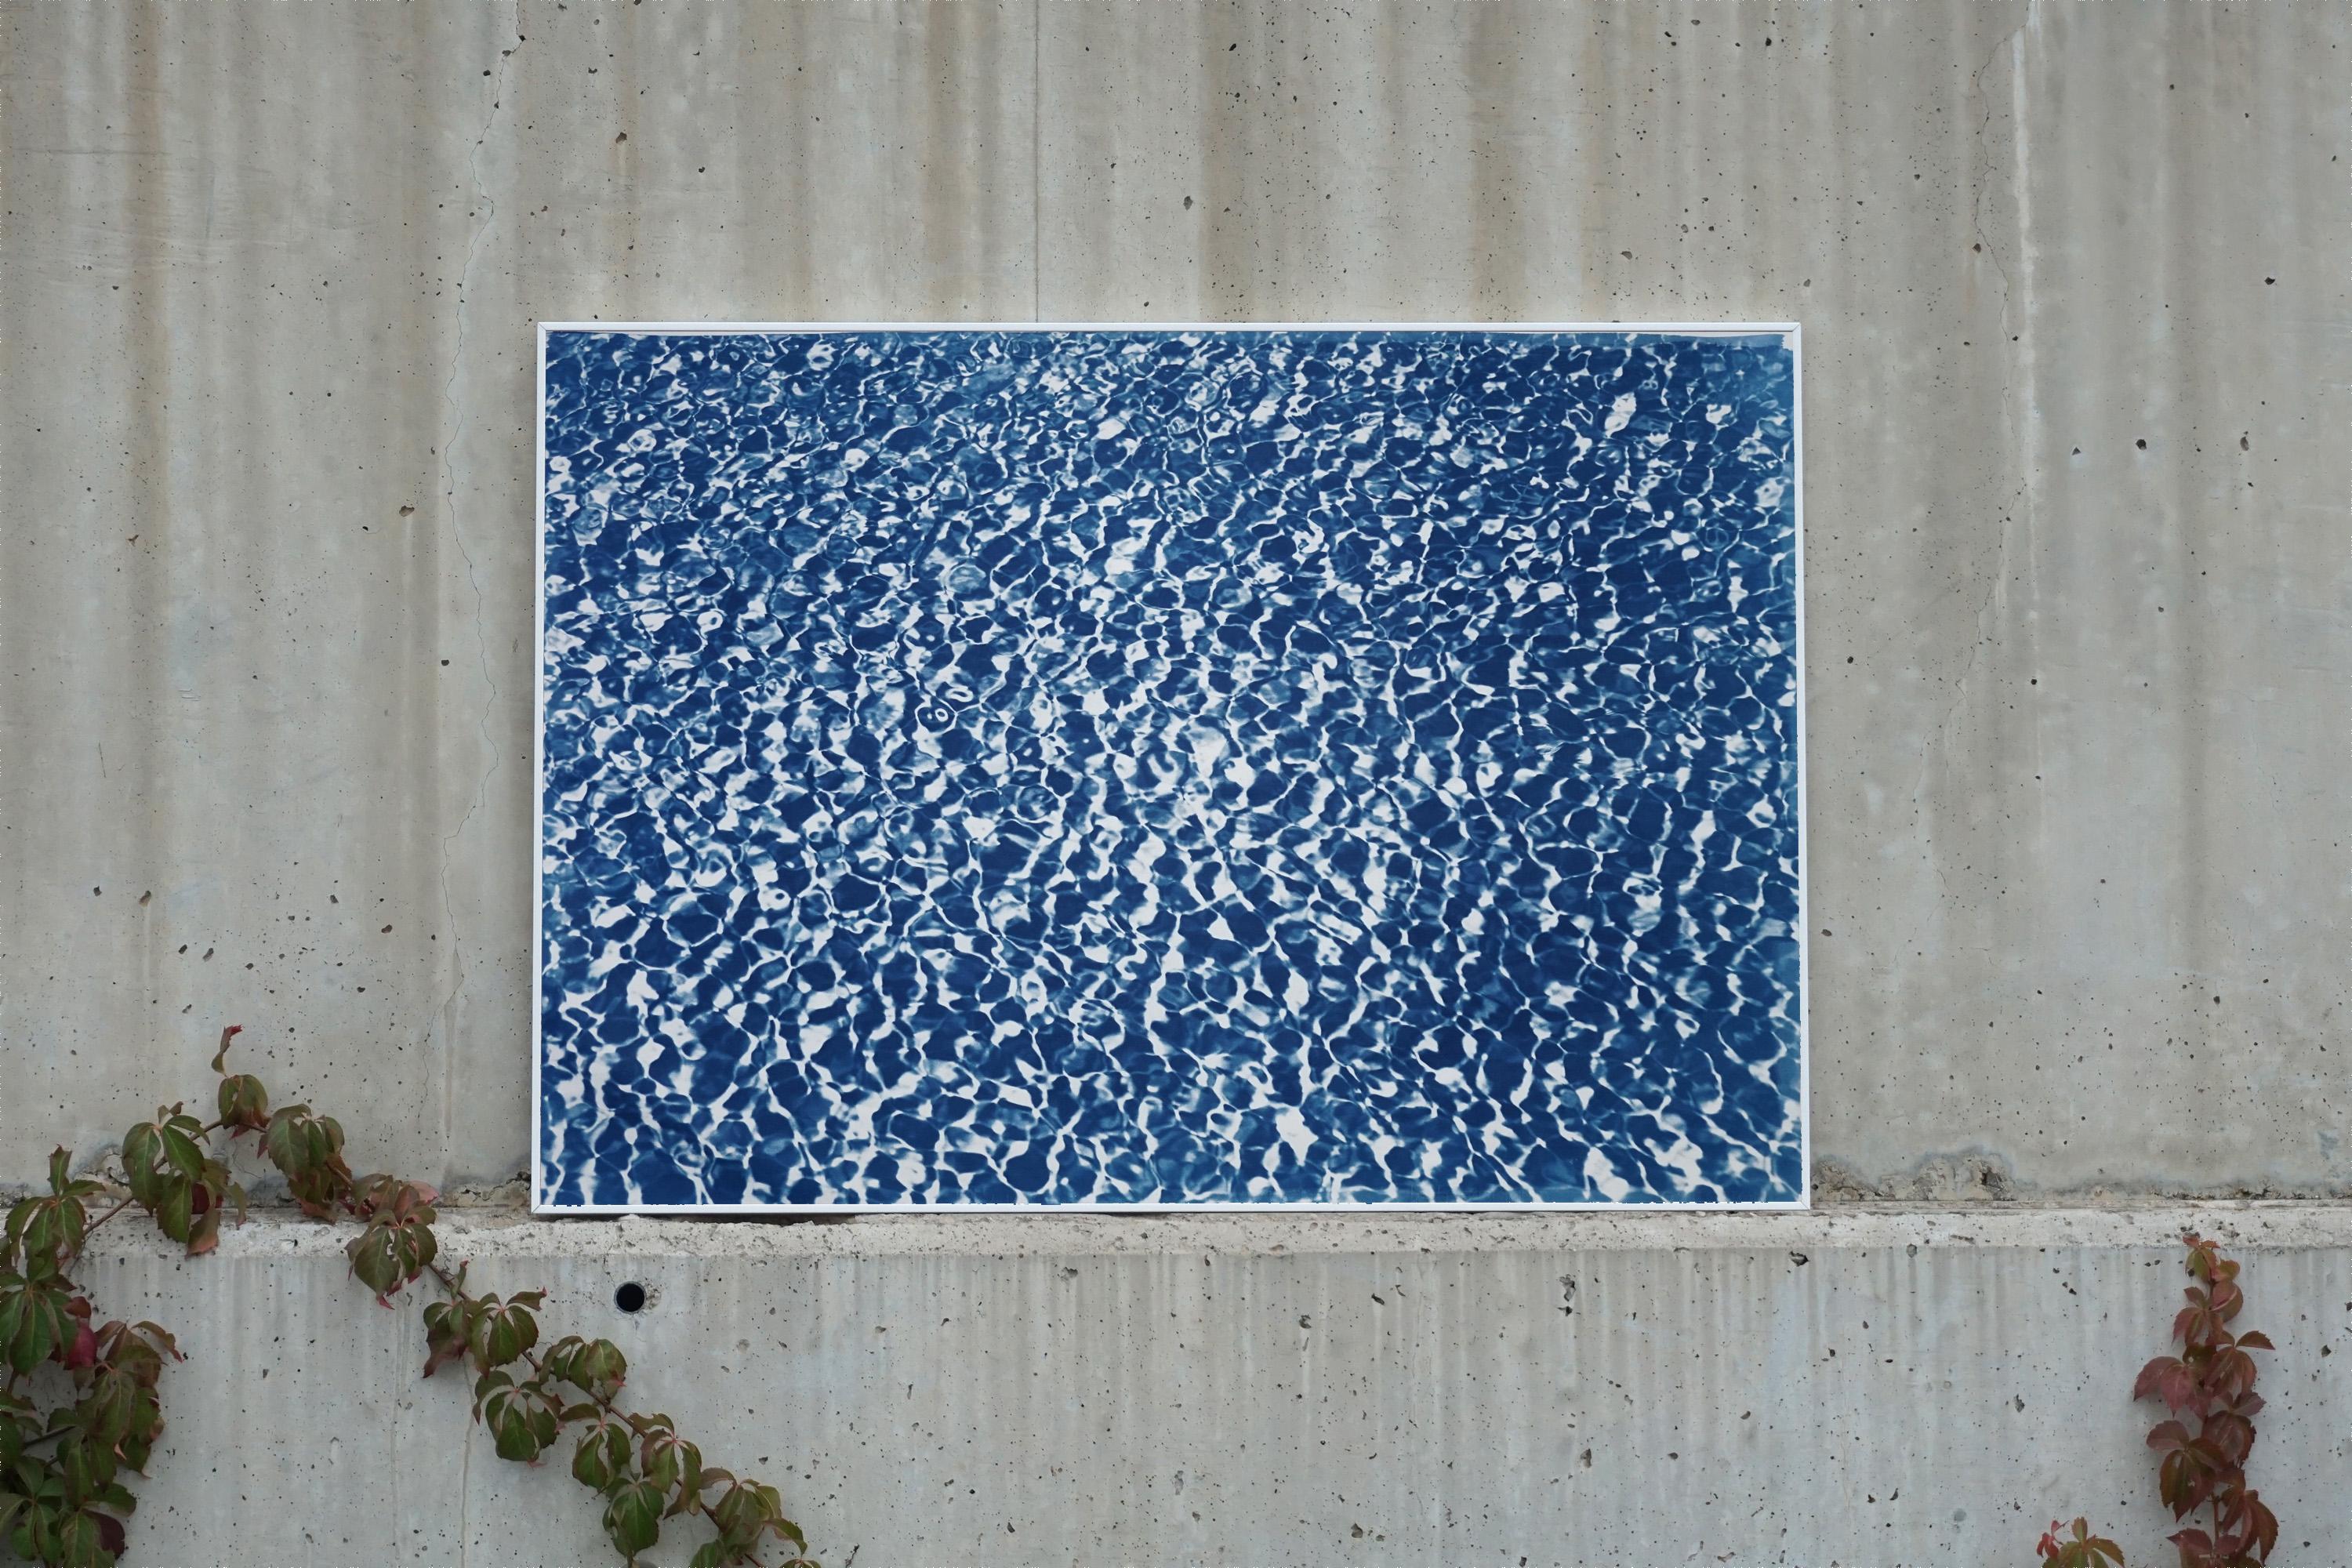 Infinity Pool, Cyanotype on Watercolor Paper, 100x70cm, Blue Abstract Art - Photograph by Kind of Cyan